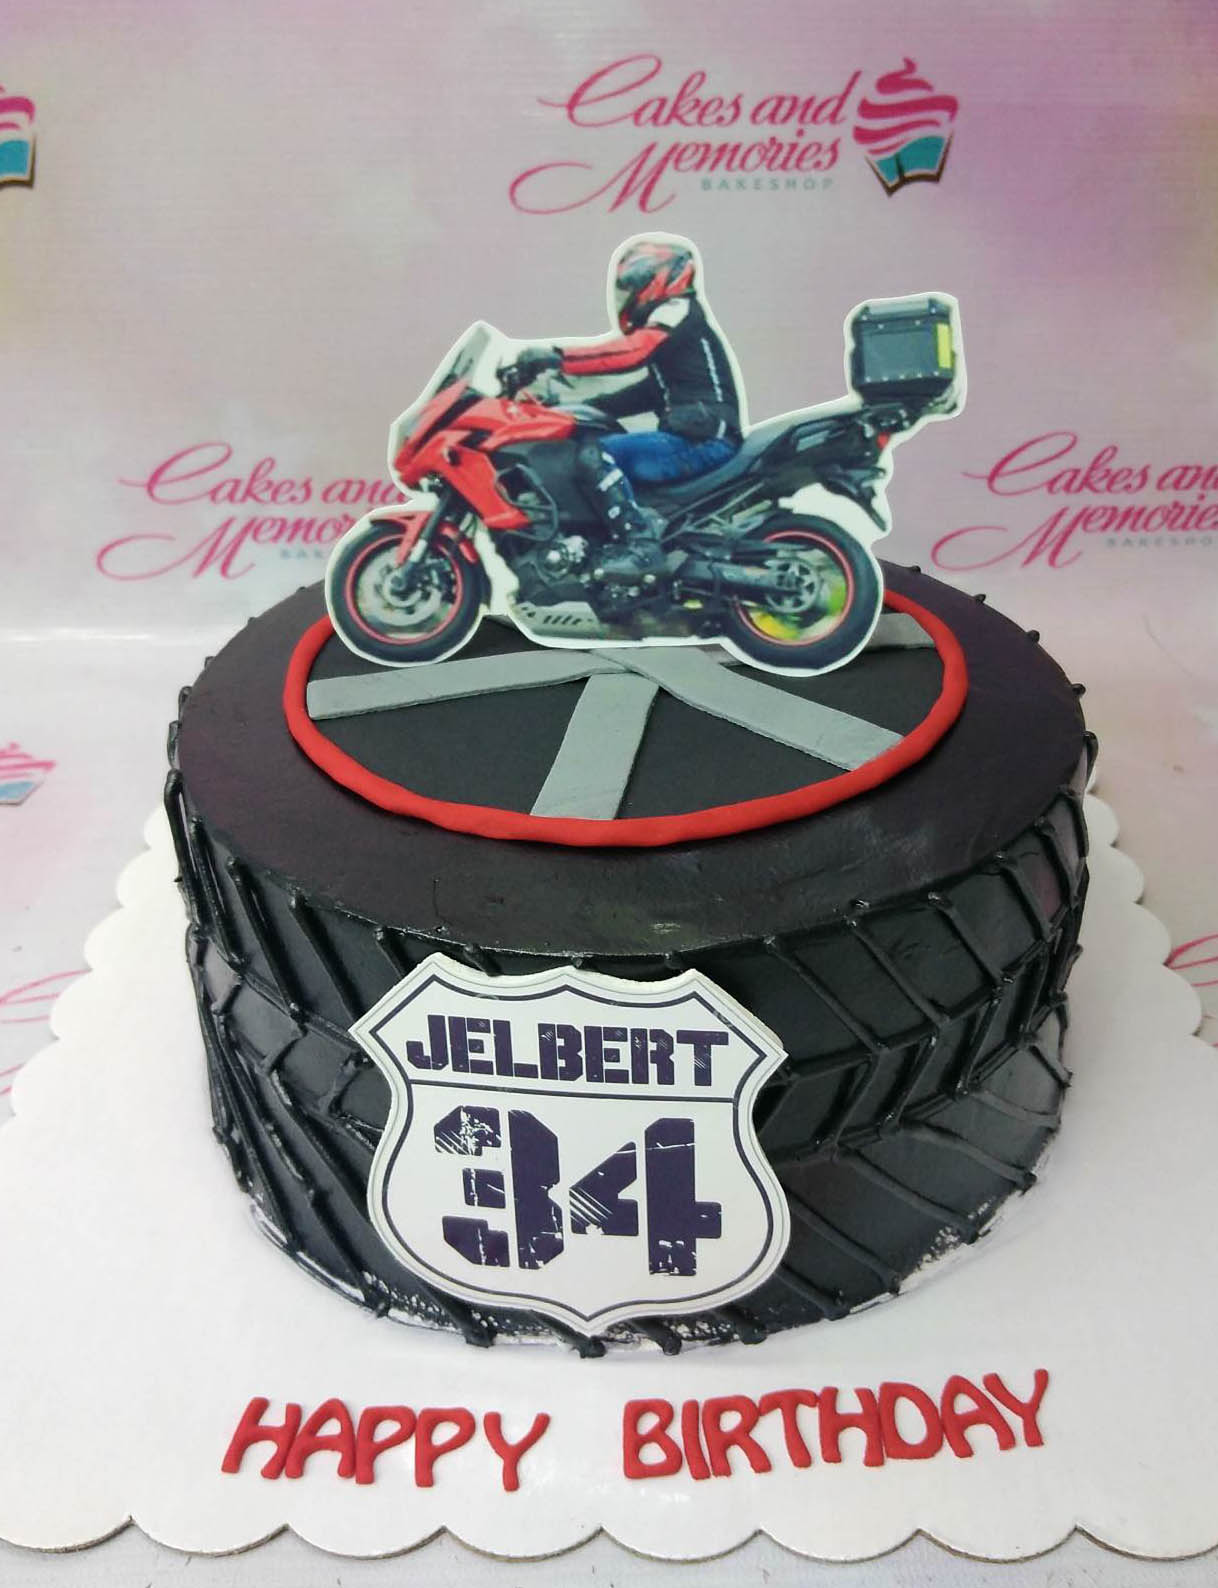 The art and design of custom cakes